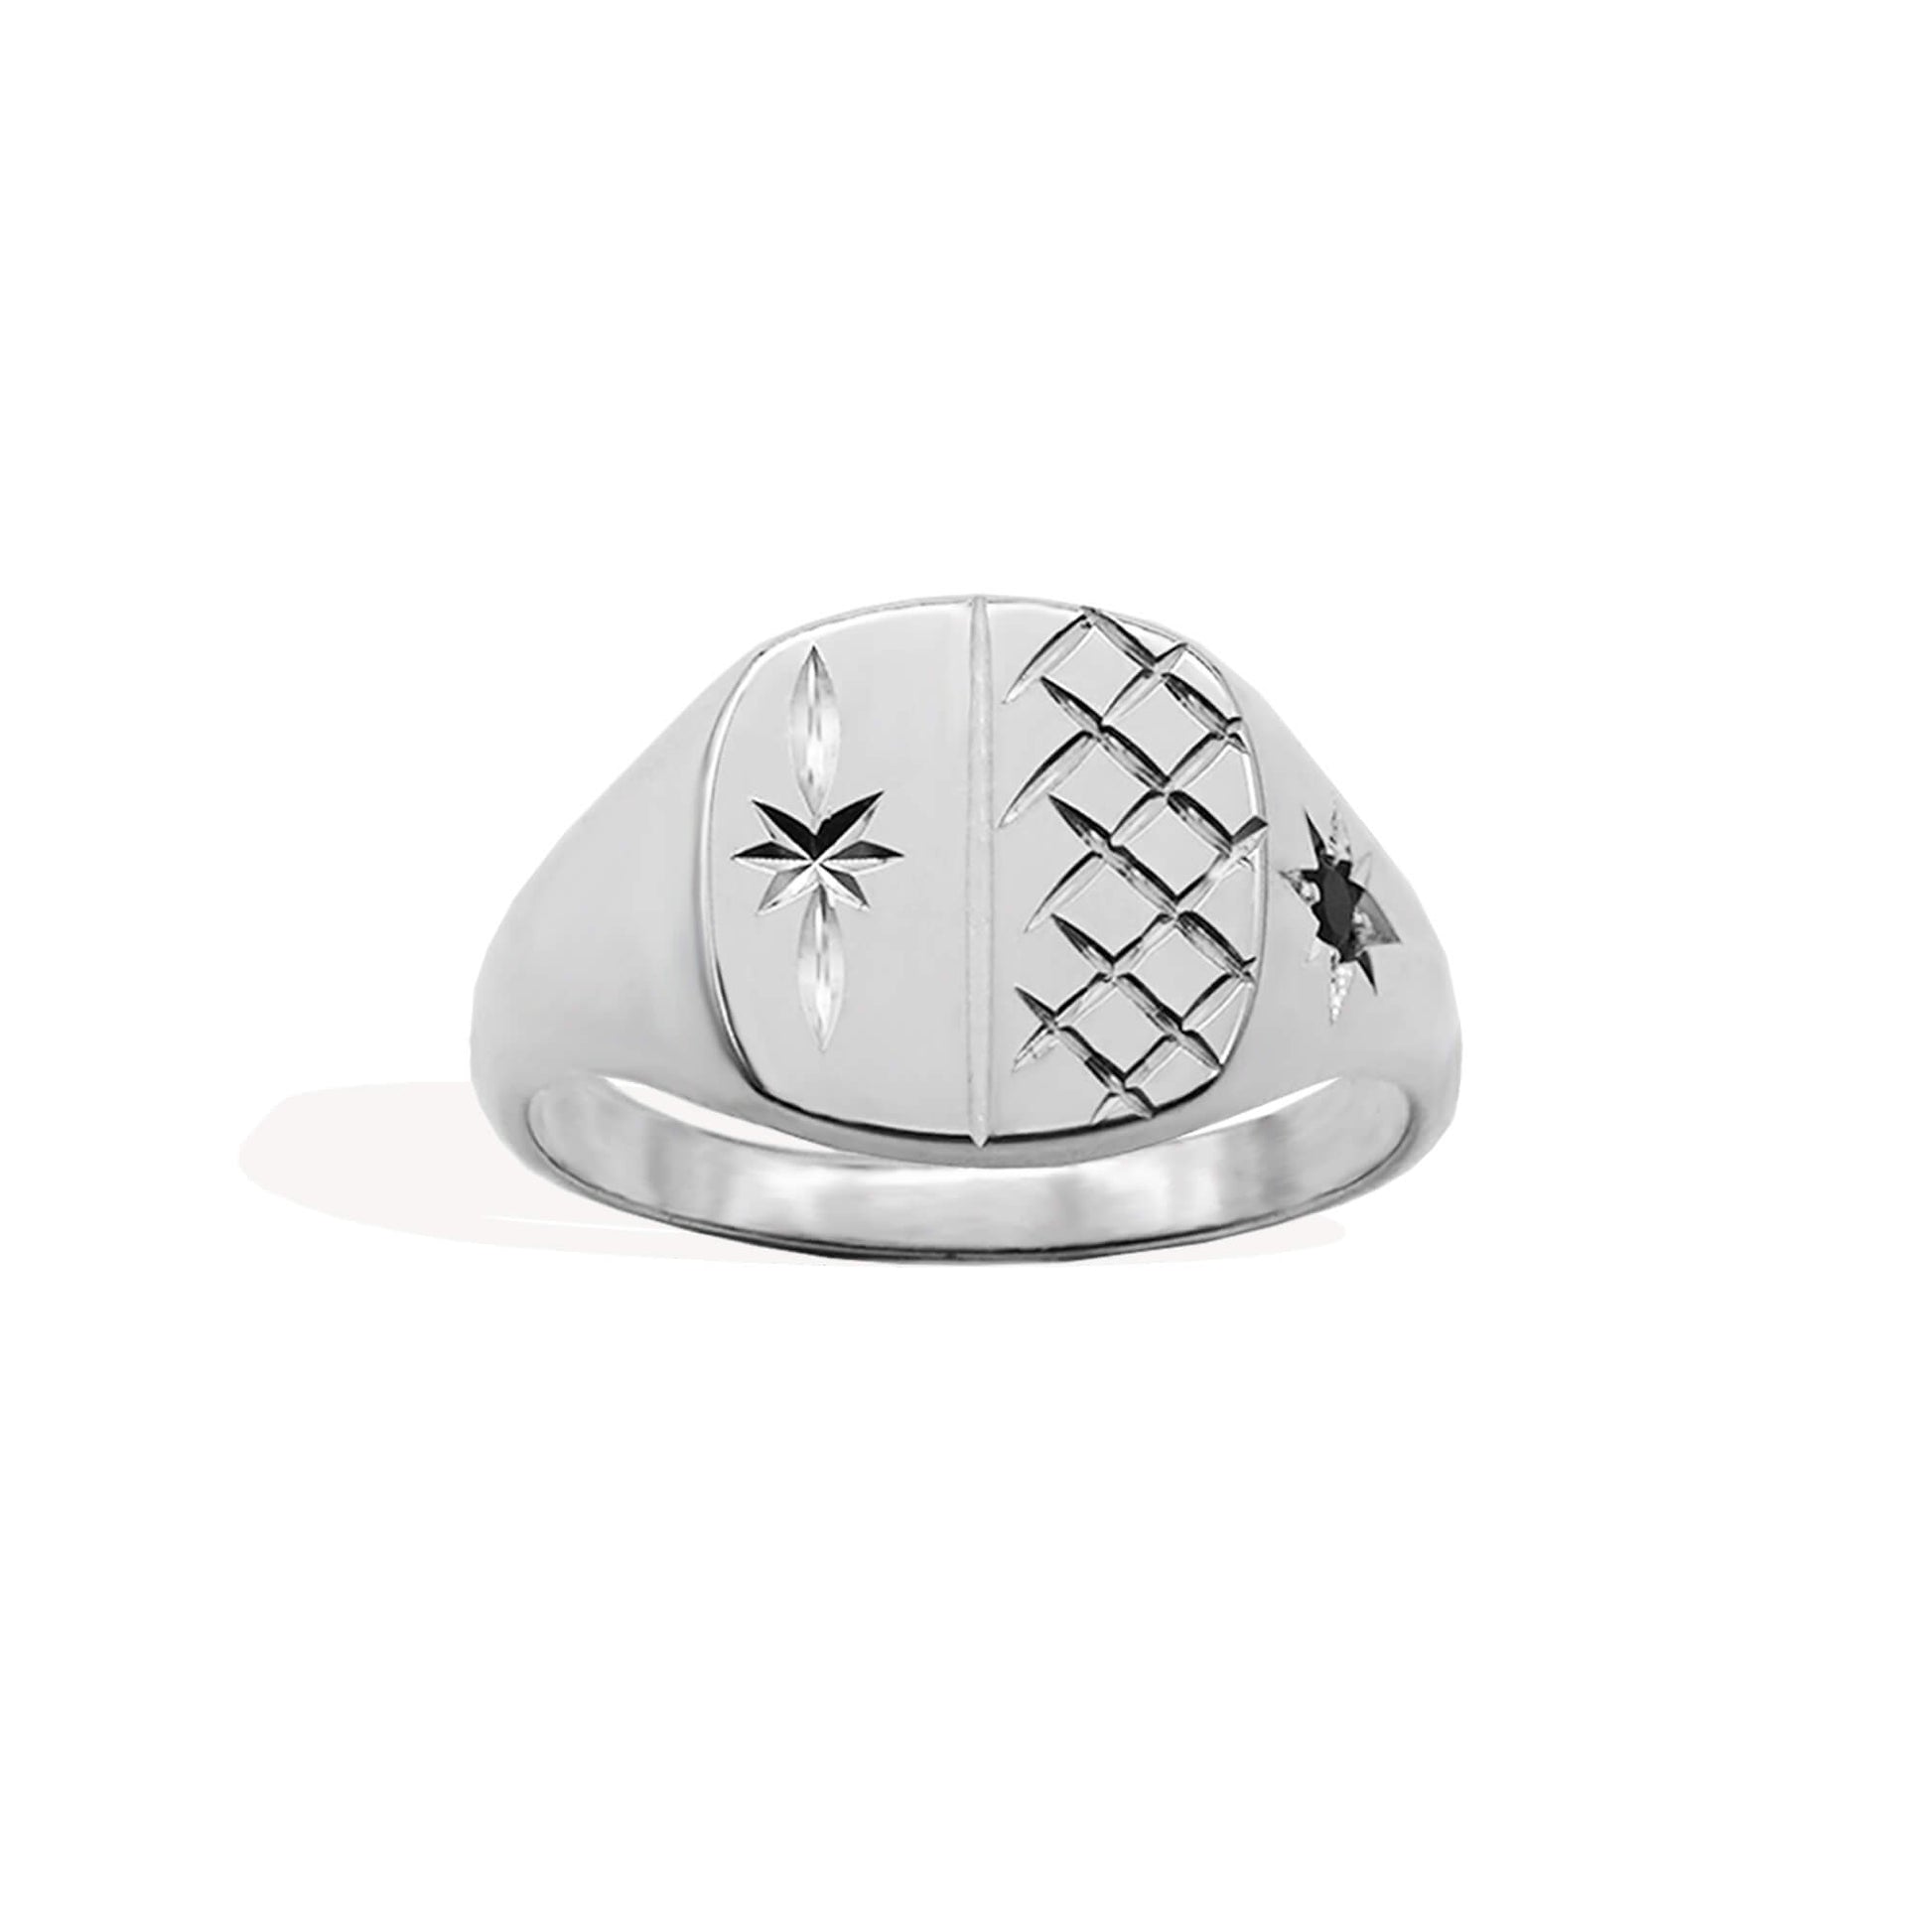 square cushion signet ring with diamond cur starburst & criss cross face, and onyx stone set in starburst on the band.